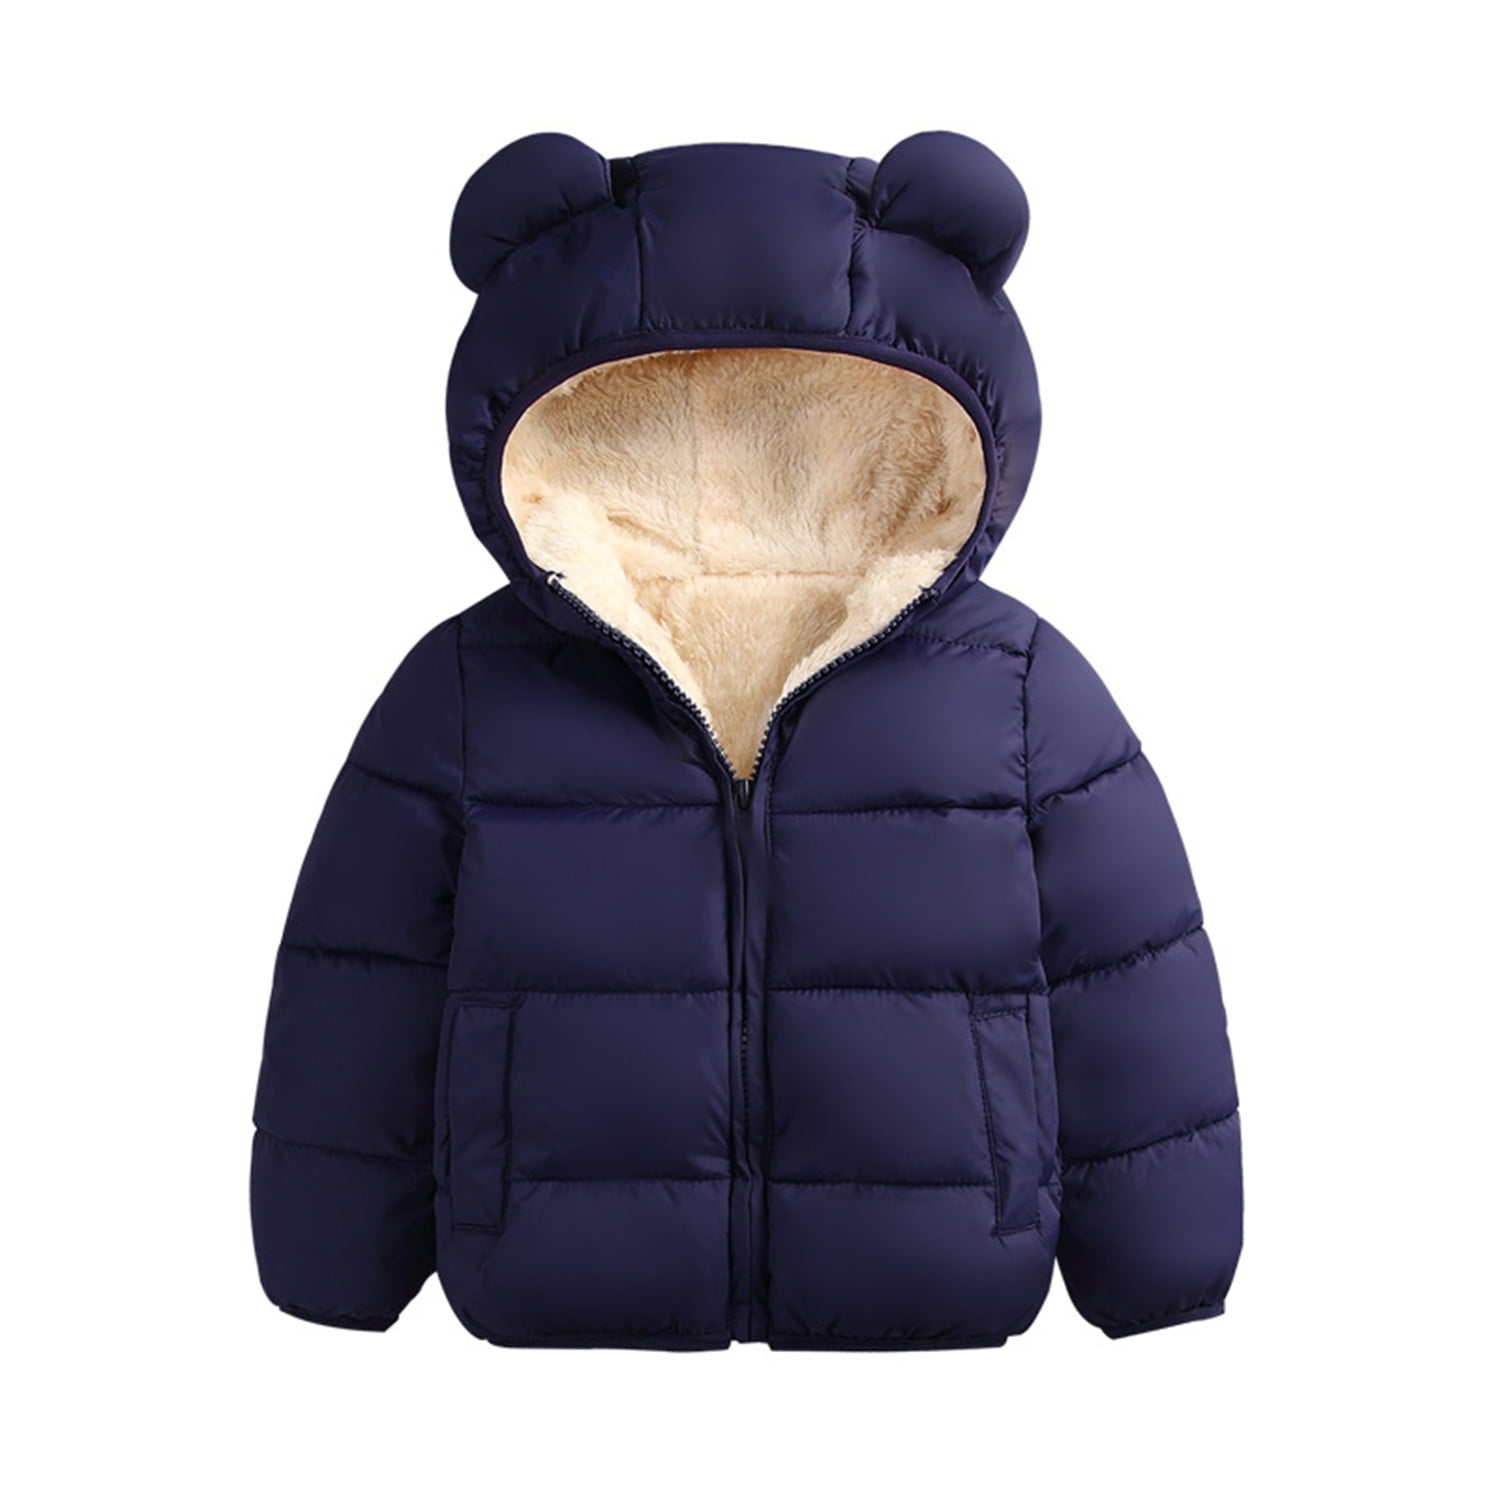 Bagilaanoe Toddler Baby Boy Girl Quilted Puffer Hooded Jacket Winter ...